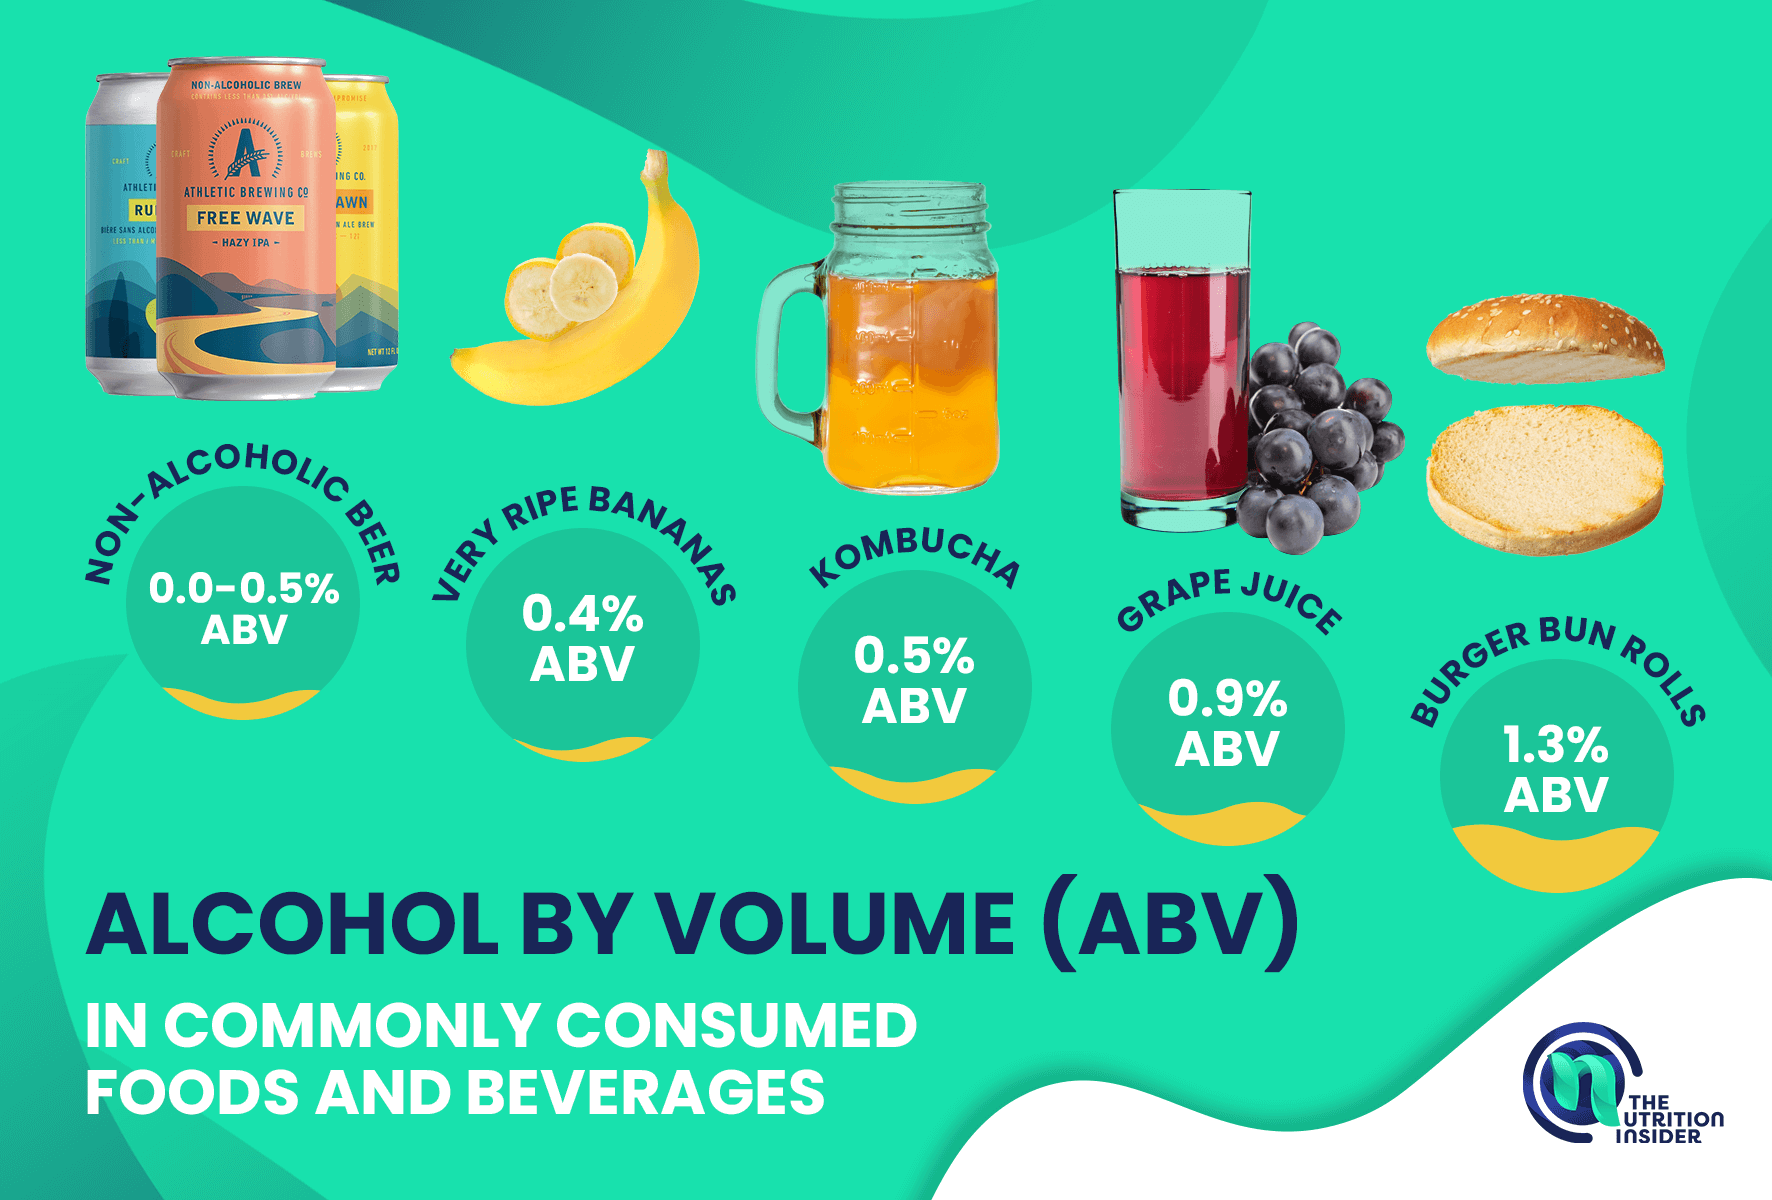 Alcohol By Volume (ABV) in Commonly Consumed Foods and Beverages